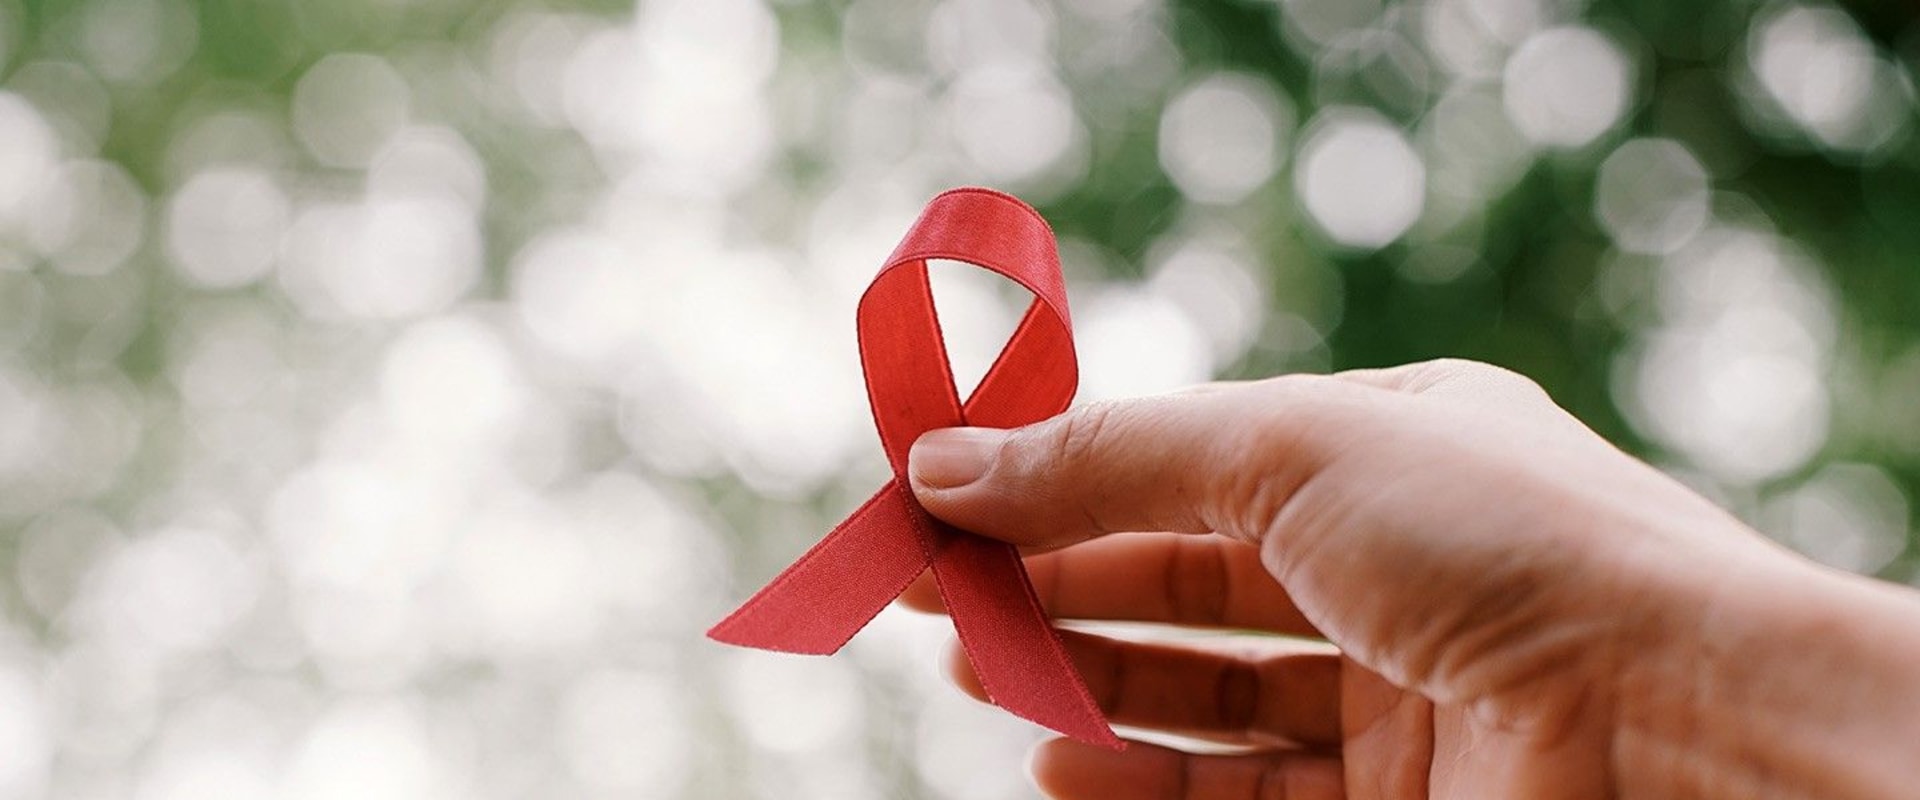 Understanding HIV/AIDS: Causes, Symptoms, and Prevention